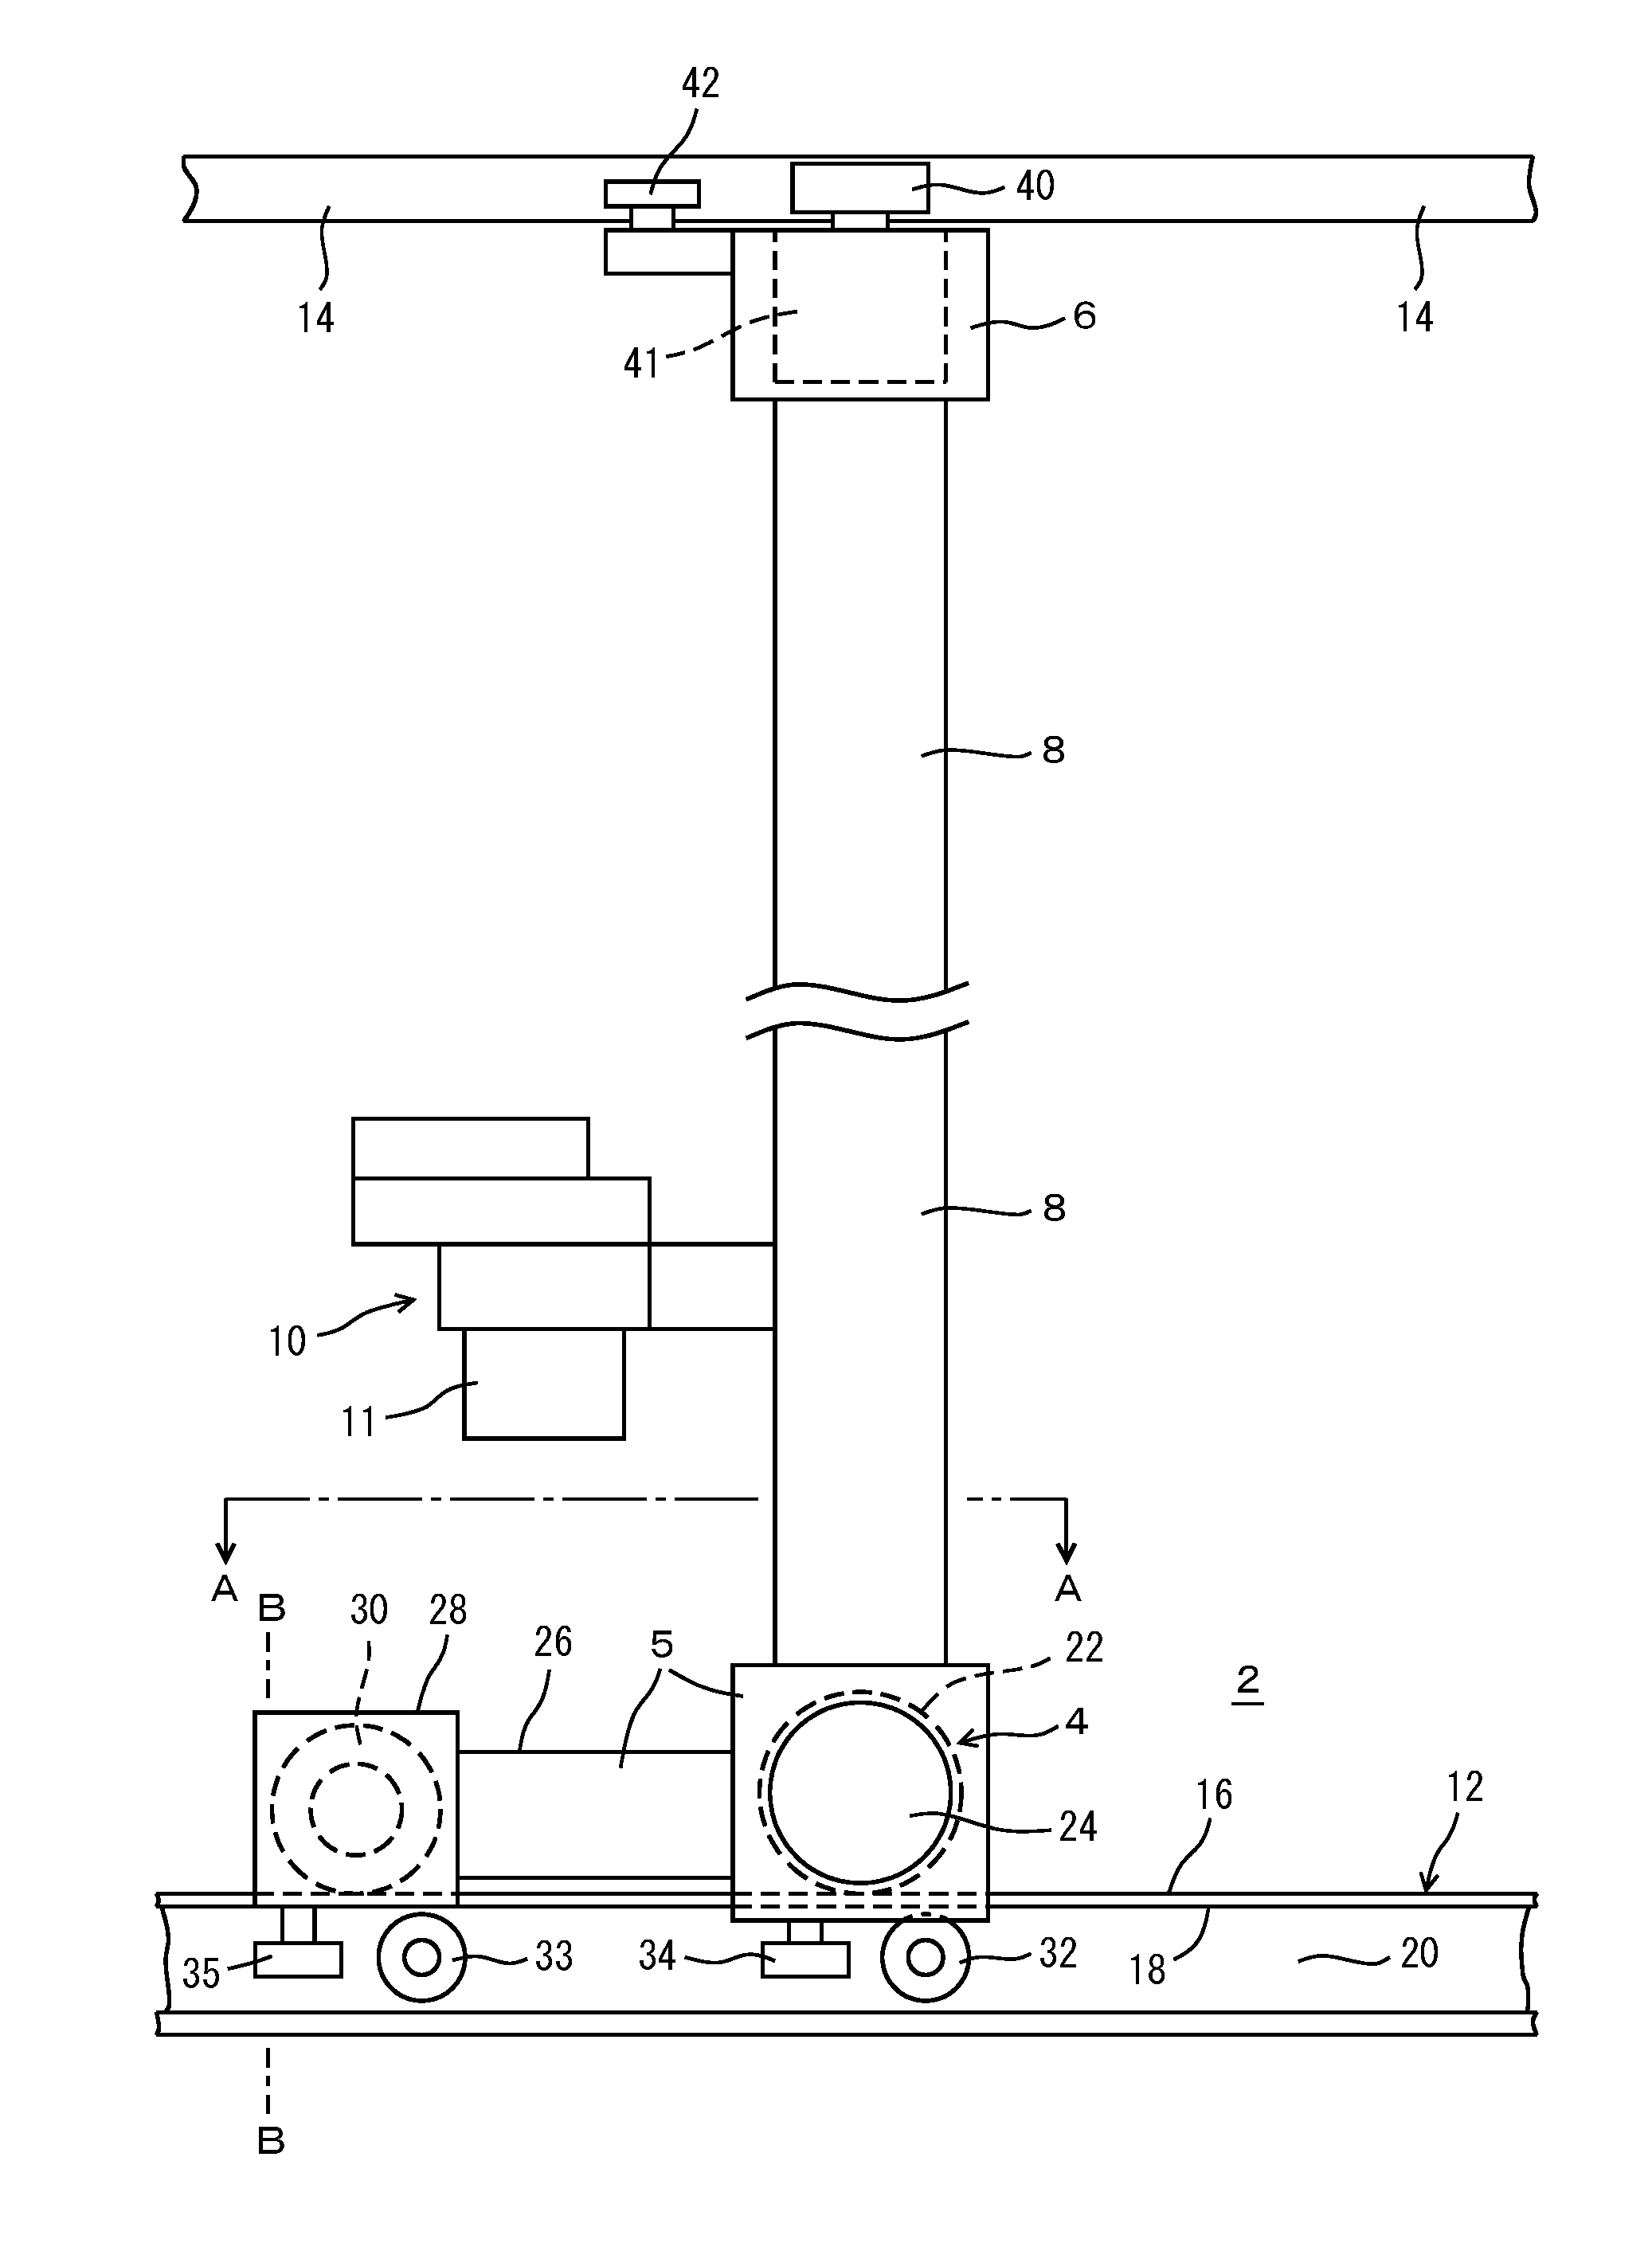 Stacker crane and method for operating same